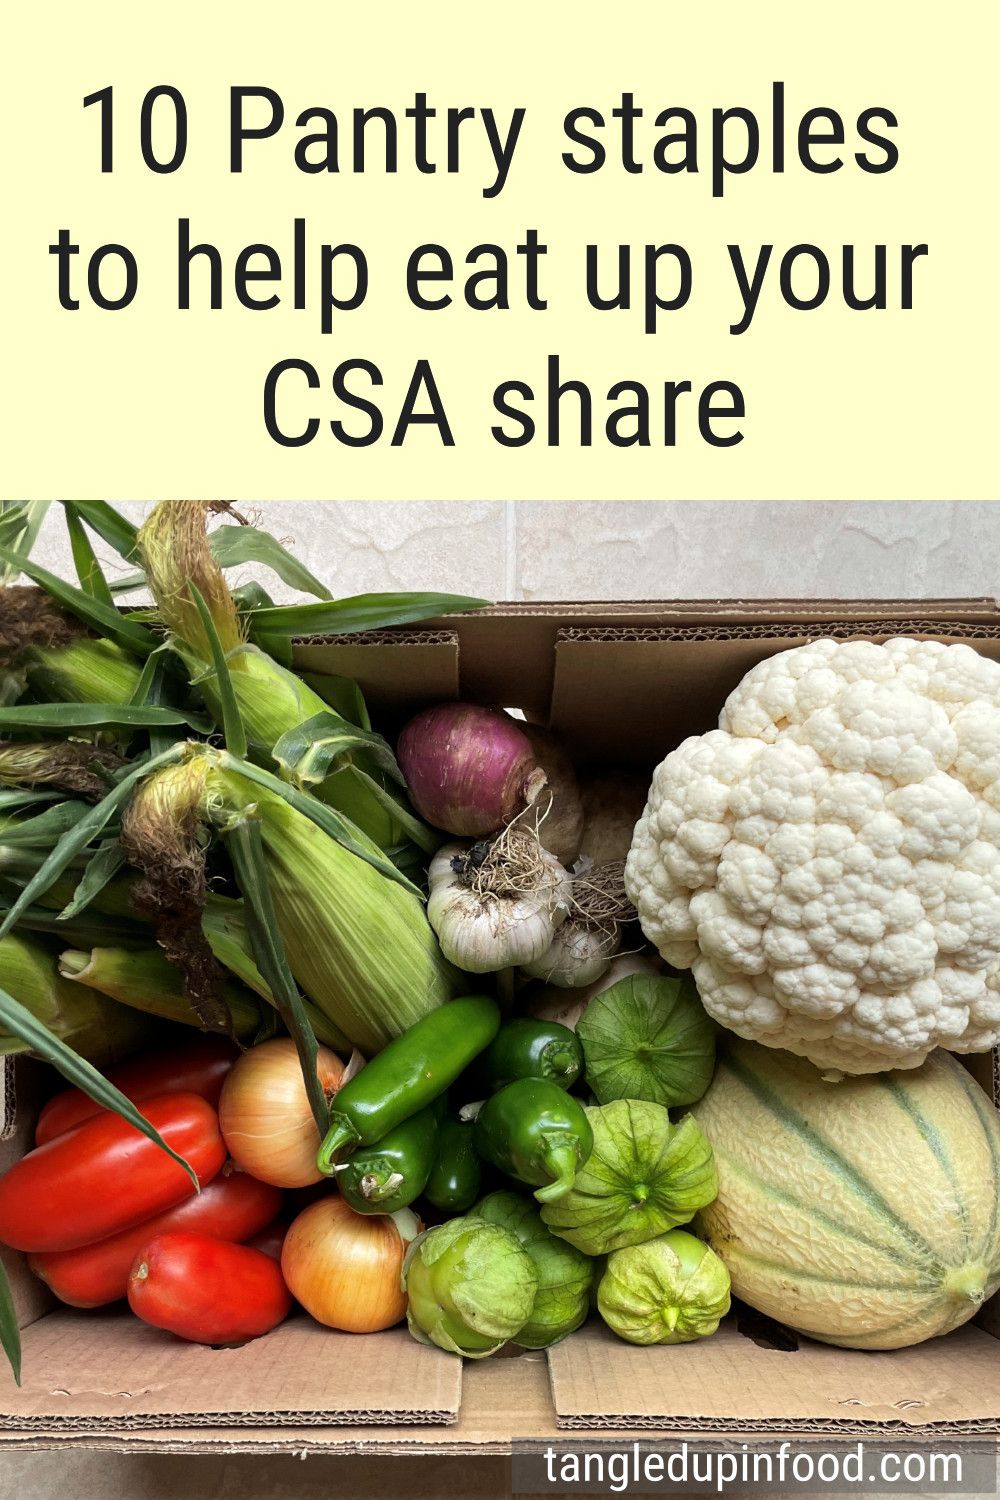 Cardboard box filled with produce and text reading "10 pantry staples to help eat up your CSA share"